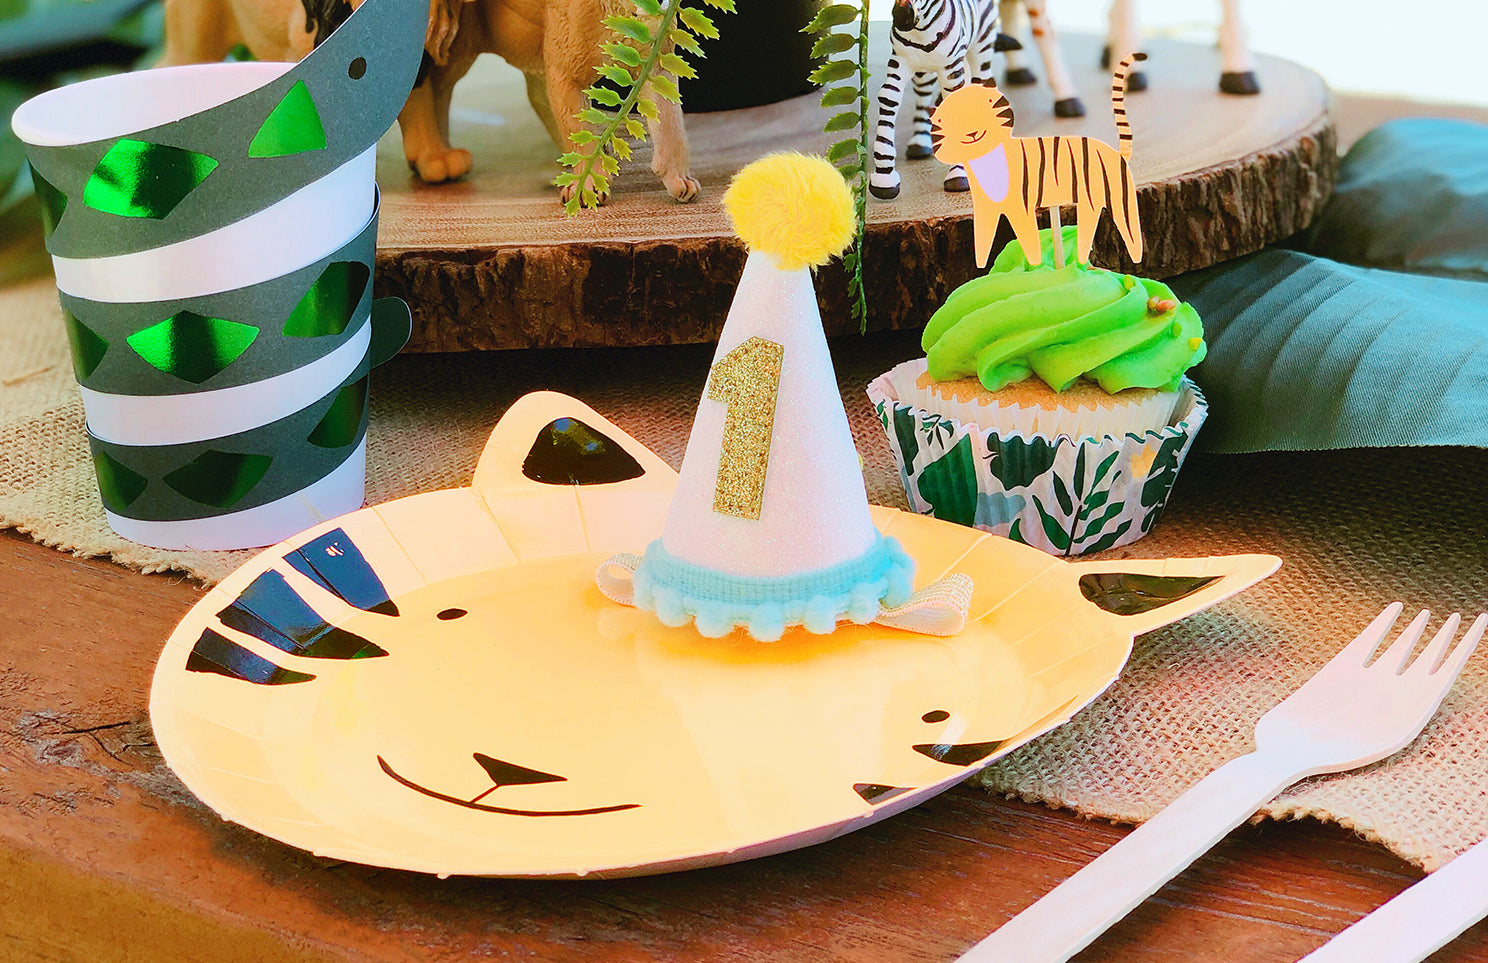 The 10 Most Popular Baby's First Birthday Themes For Boys and Girls